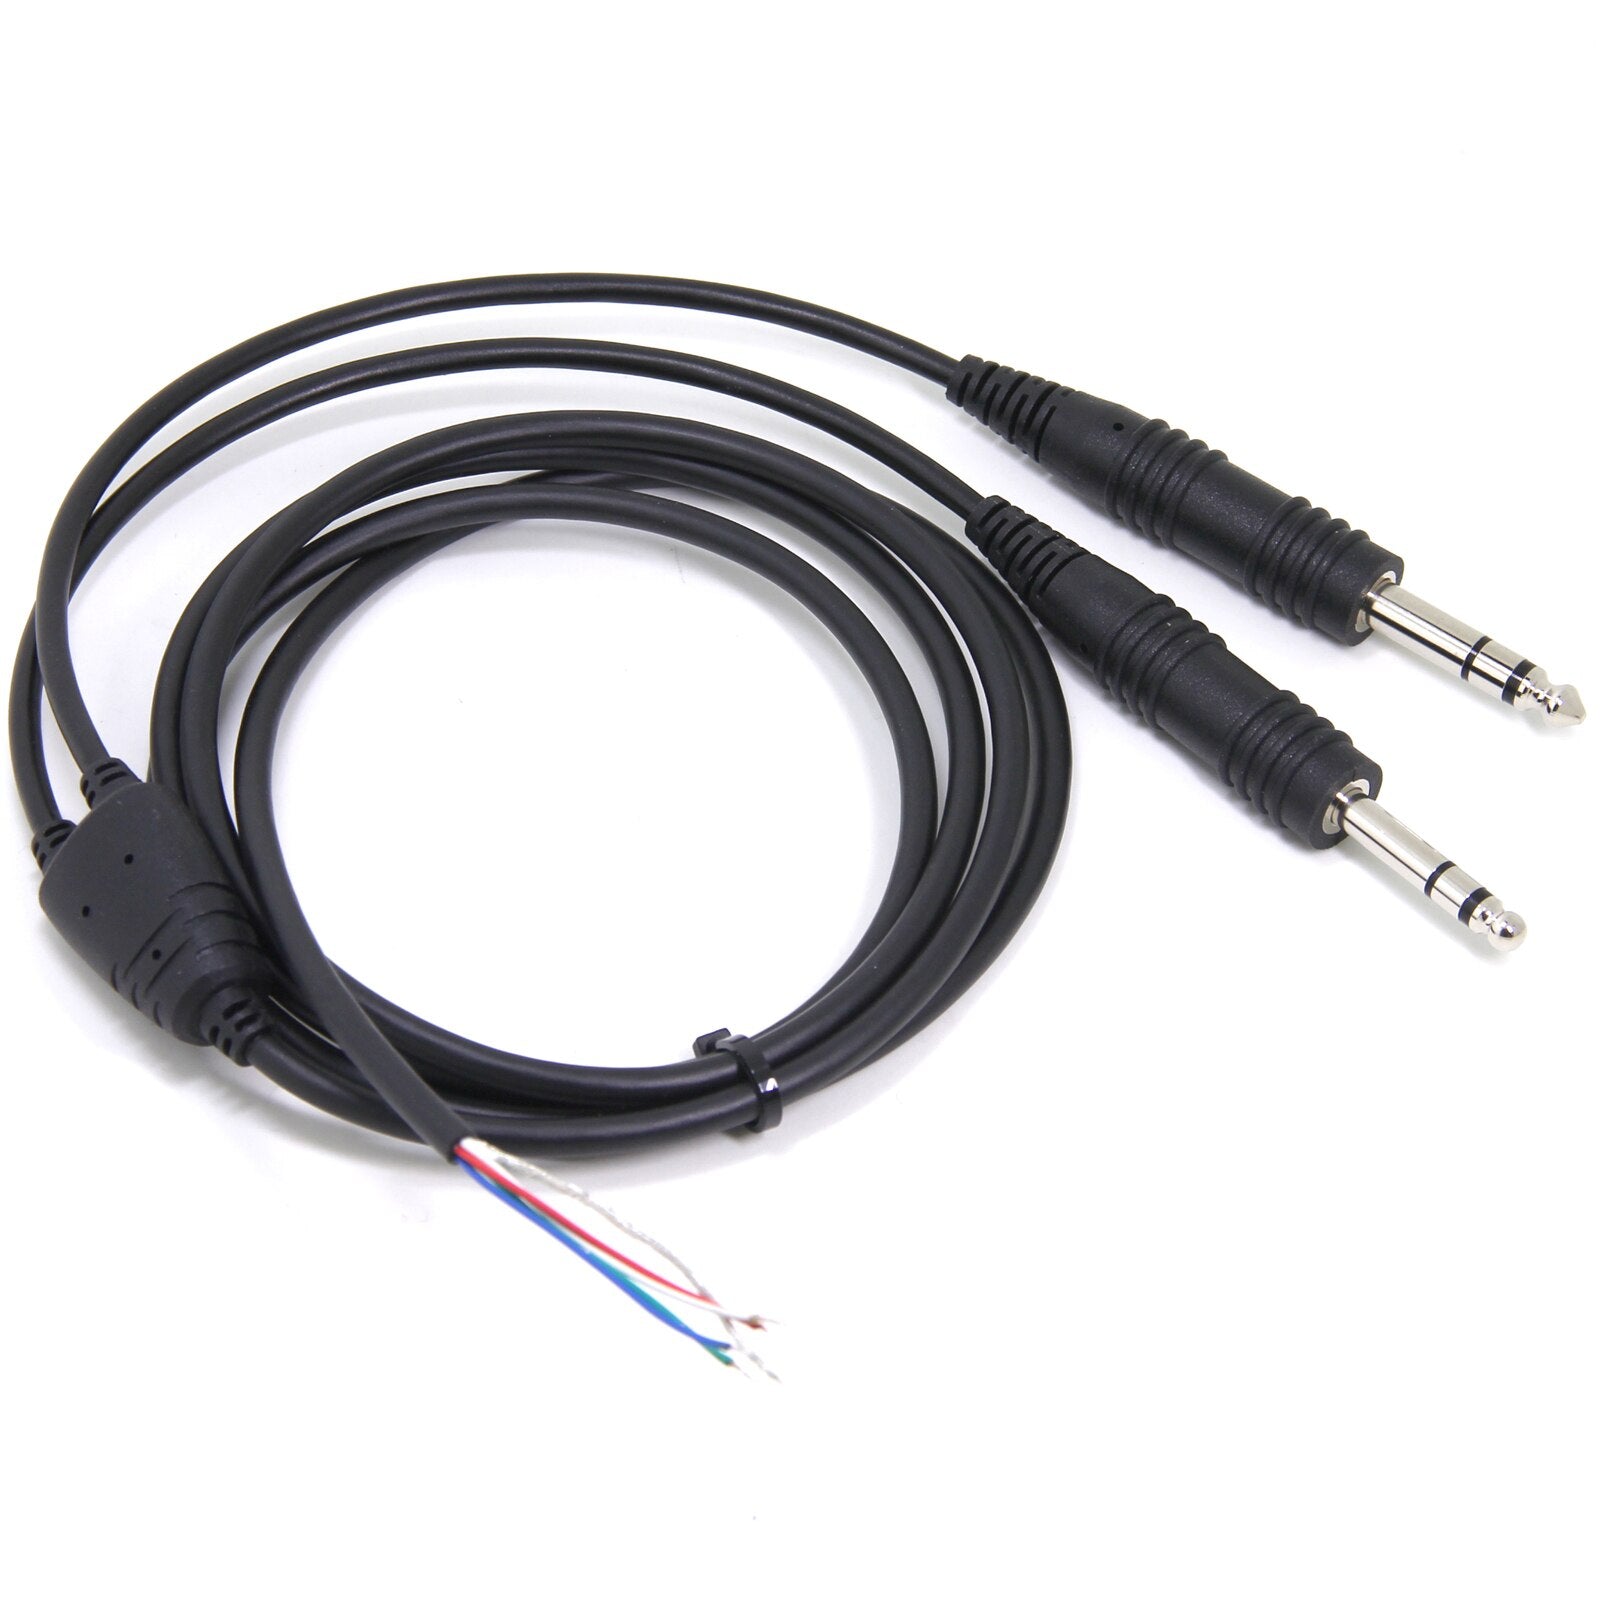 Aviation Headset Replacement Cable for David Clark AVCOMM Pilot